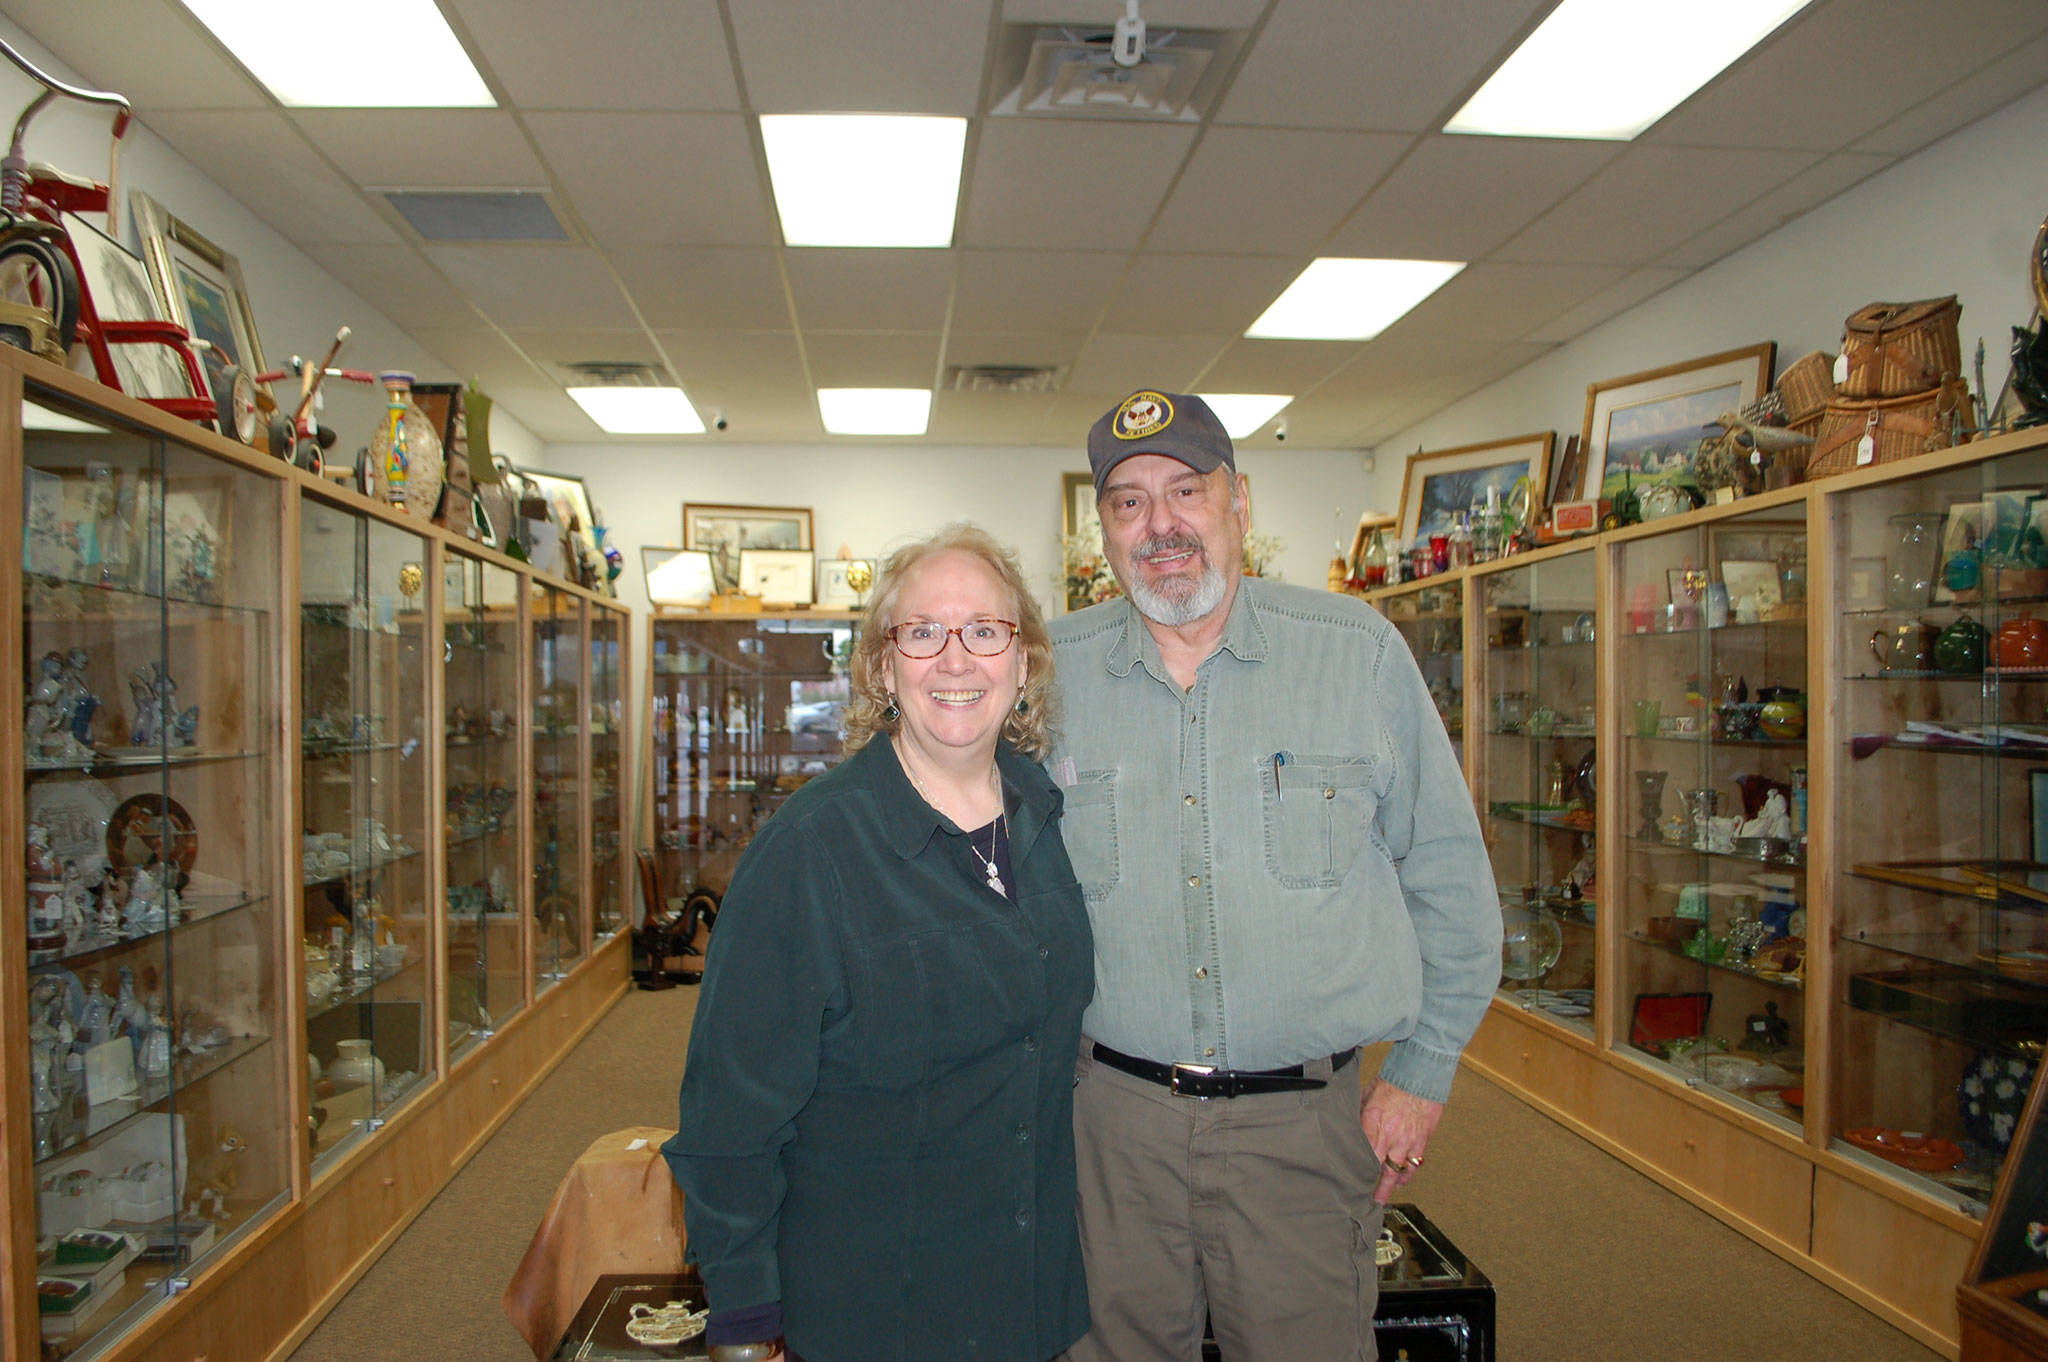 New retail resale shop specializes in jewelry, collectibles and art